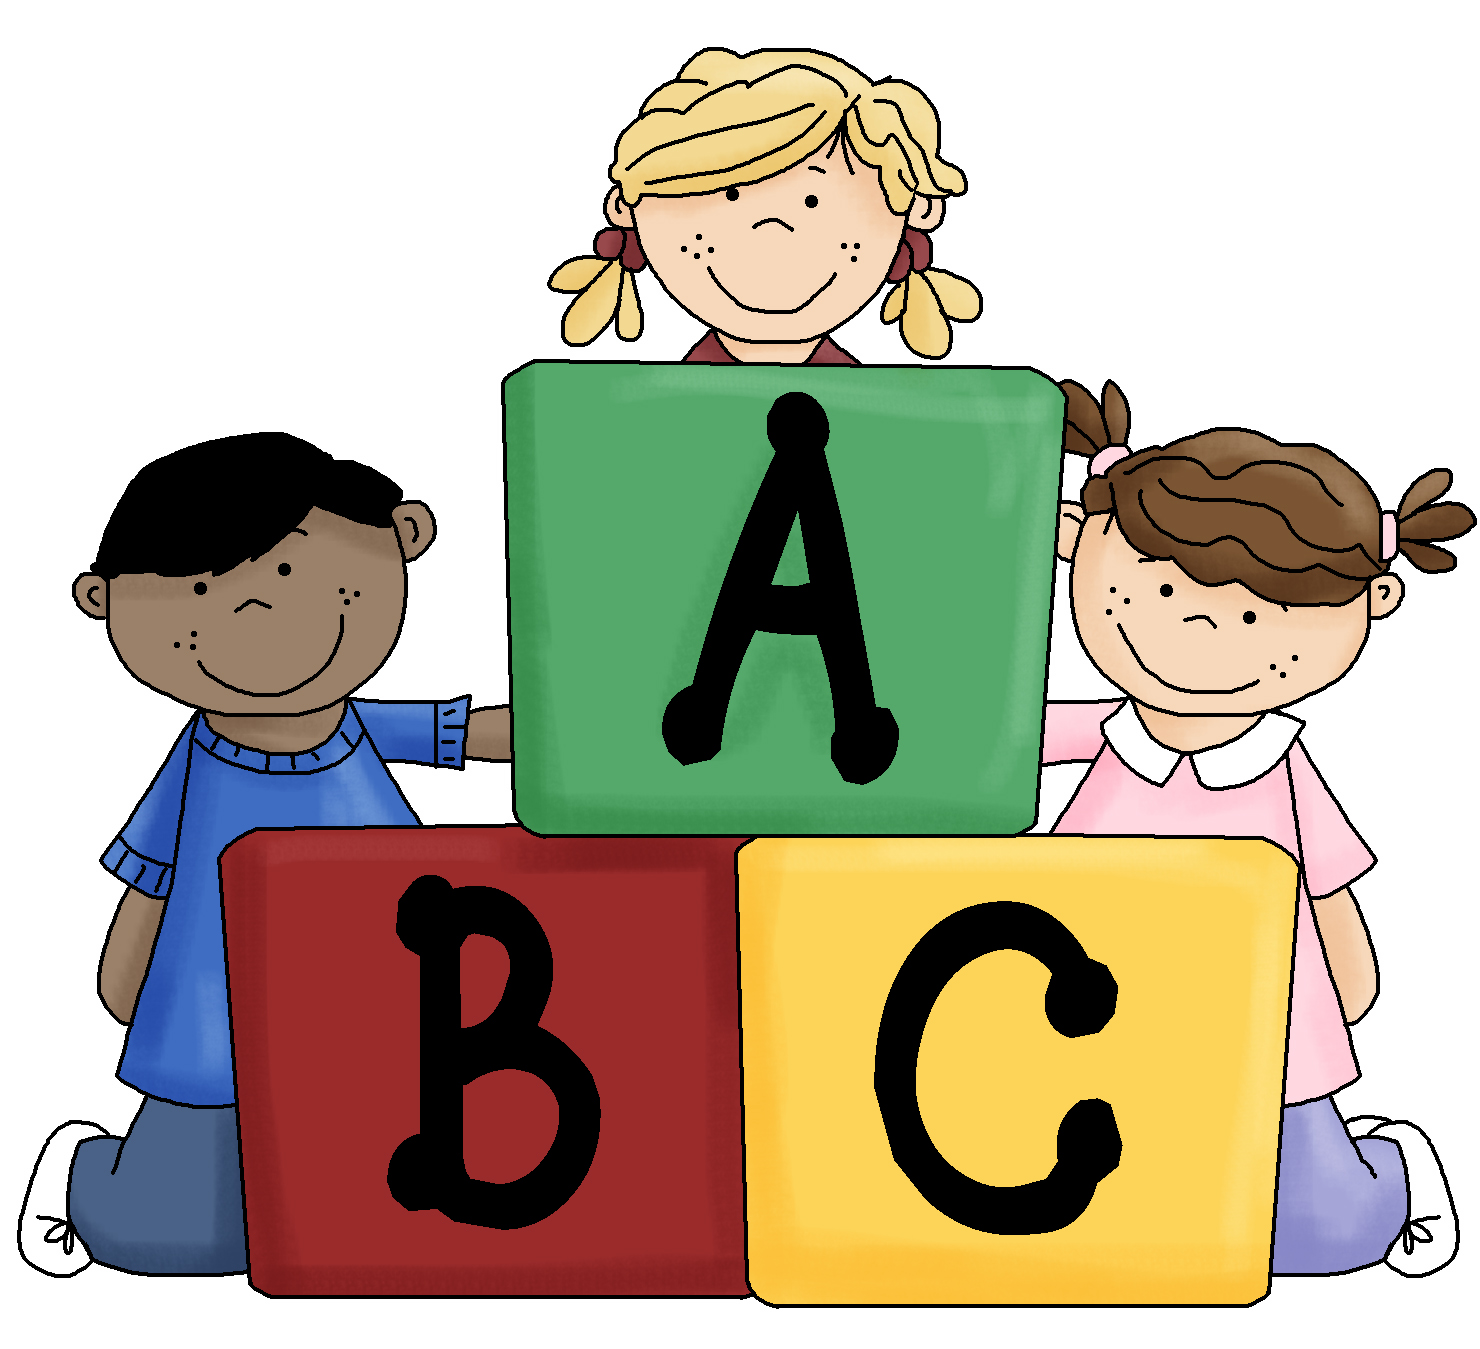 Galleries Related  Abc Blocks Clipart  Abc Blocks Drawing